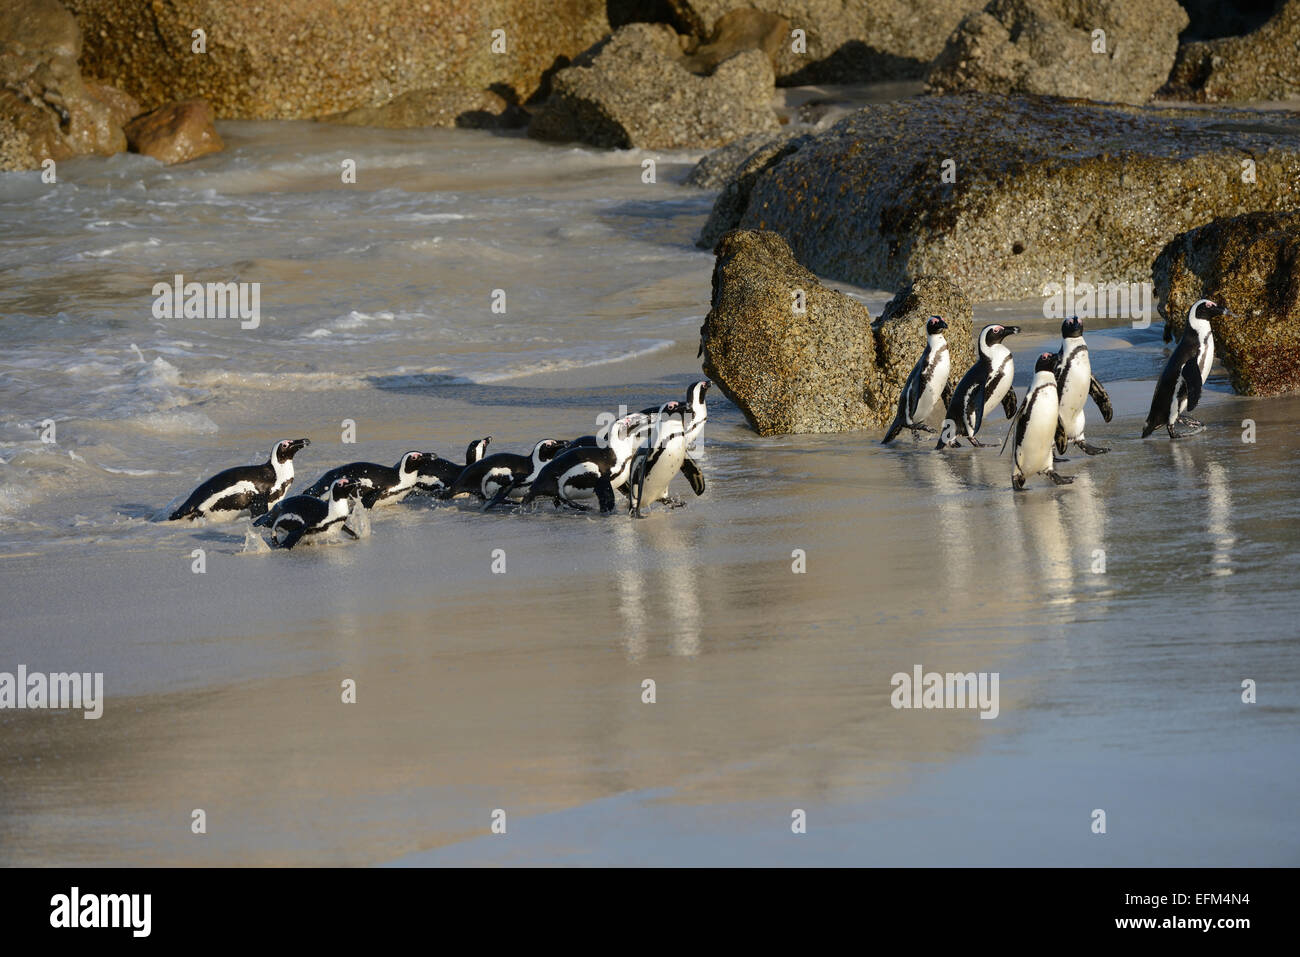 African Penguins (Spheniscus demersus) at a beach near Cape Town in South Africa. Stock Photo